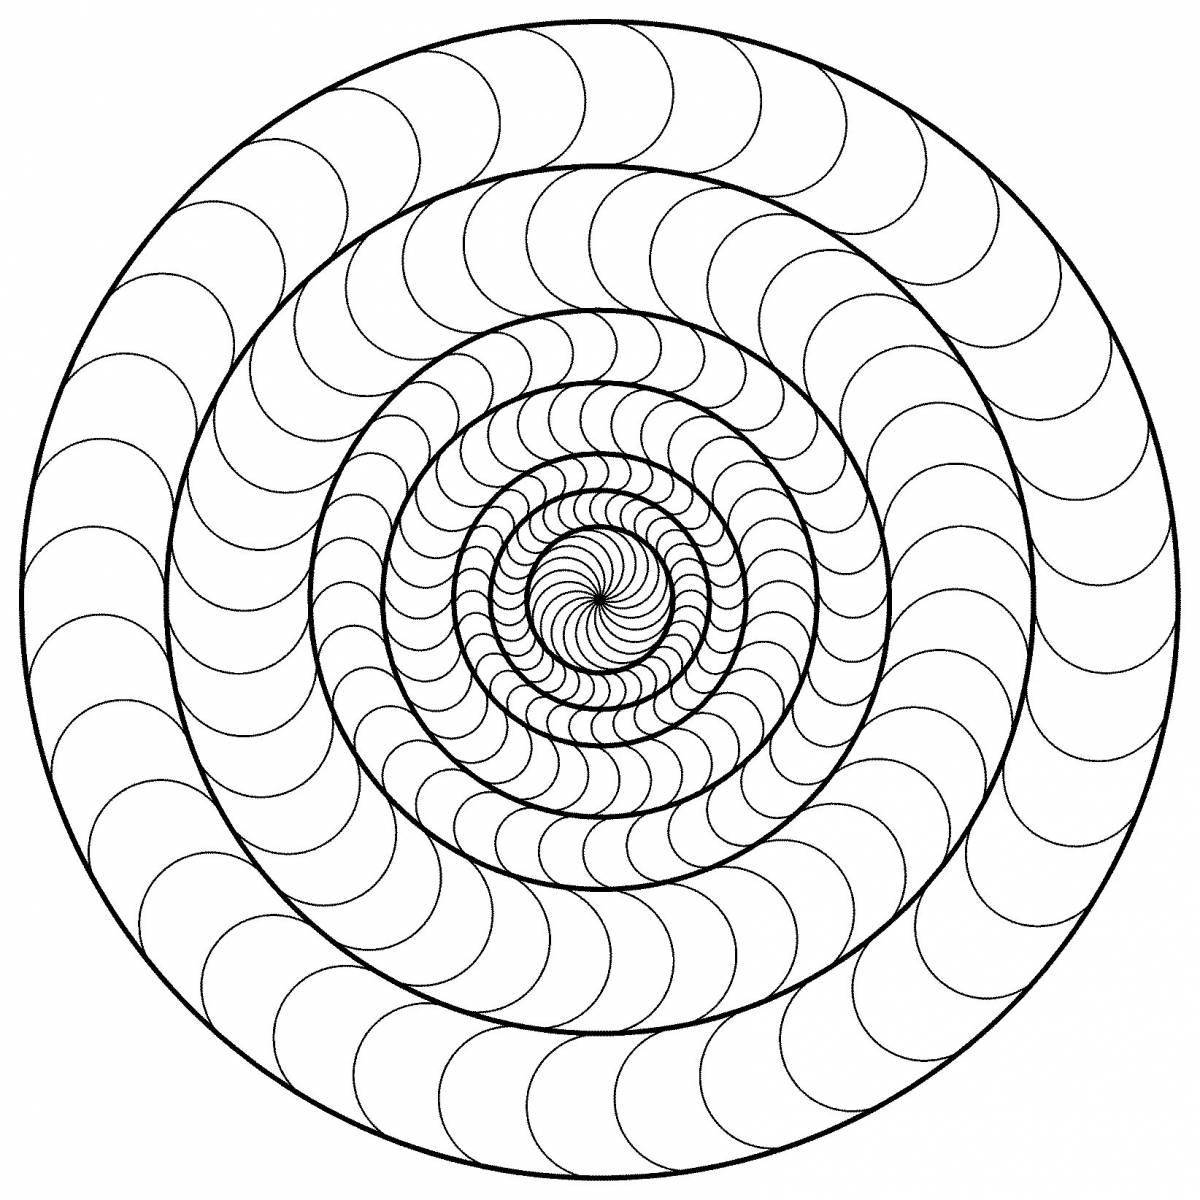 Coloring page charming spiral in a circle